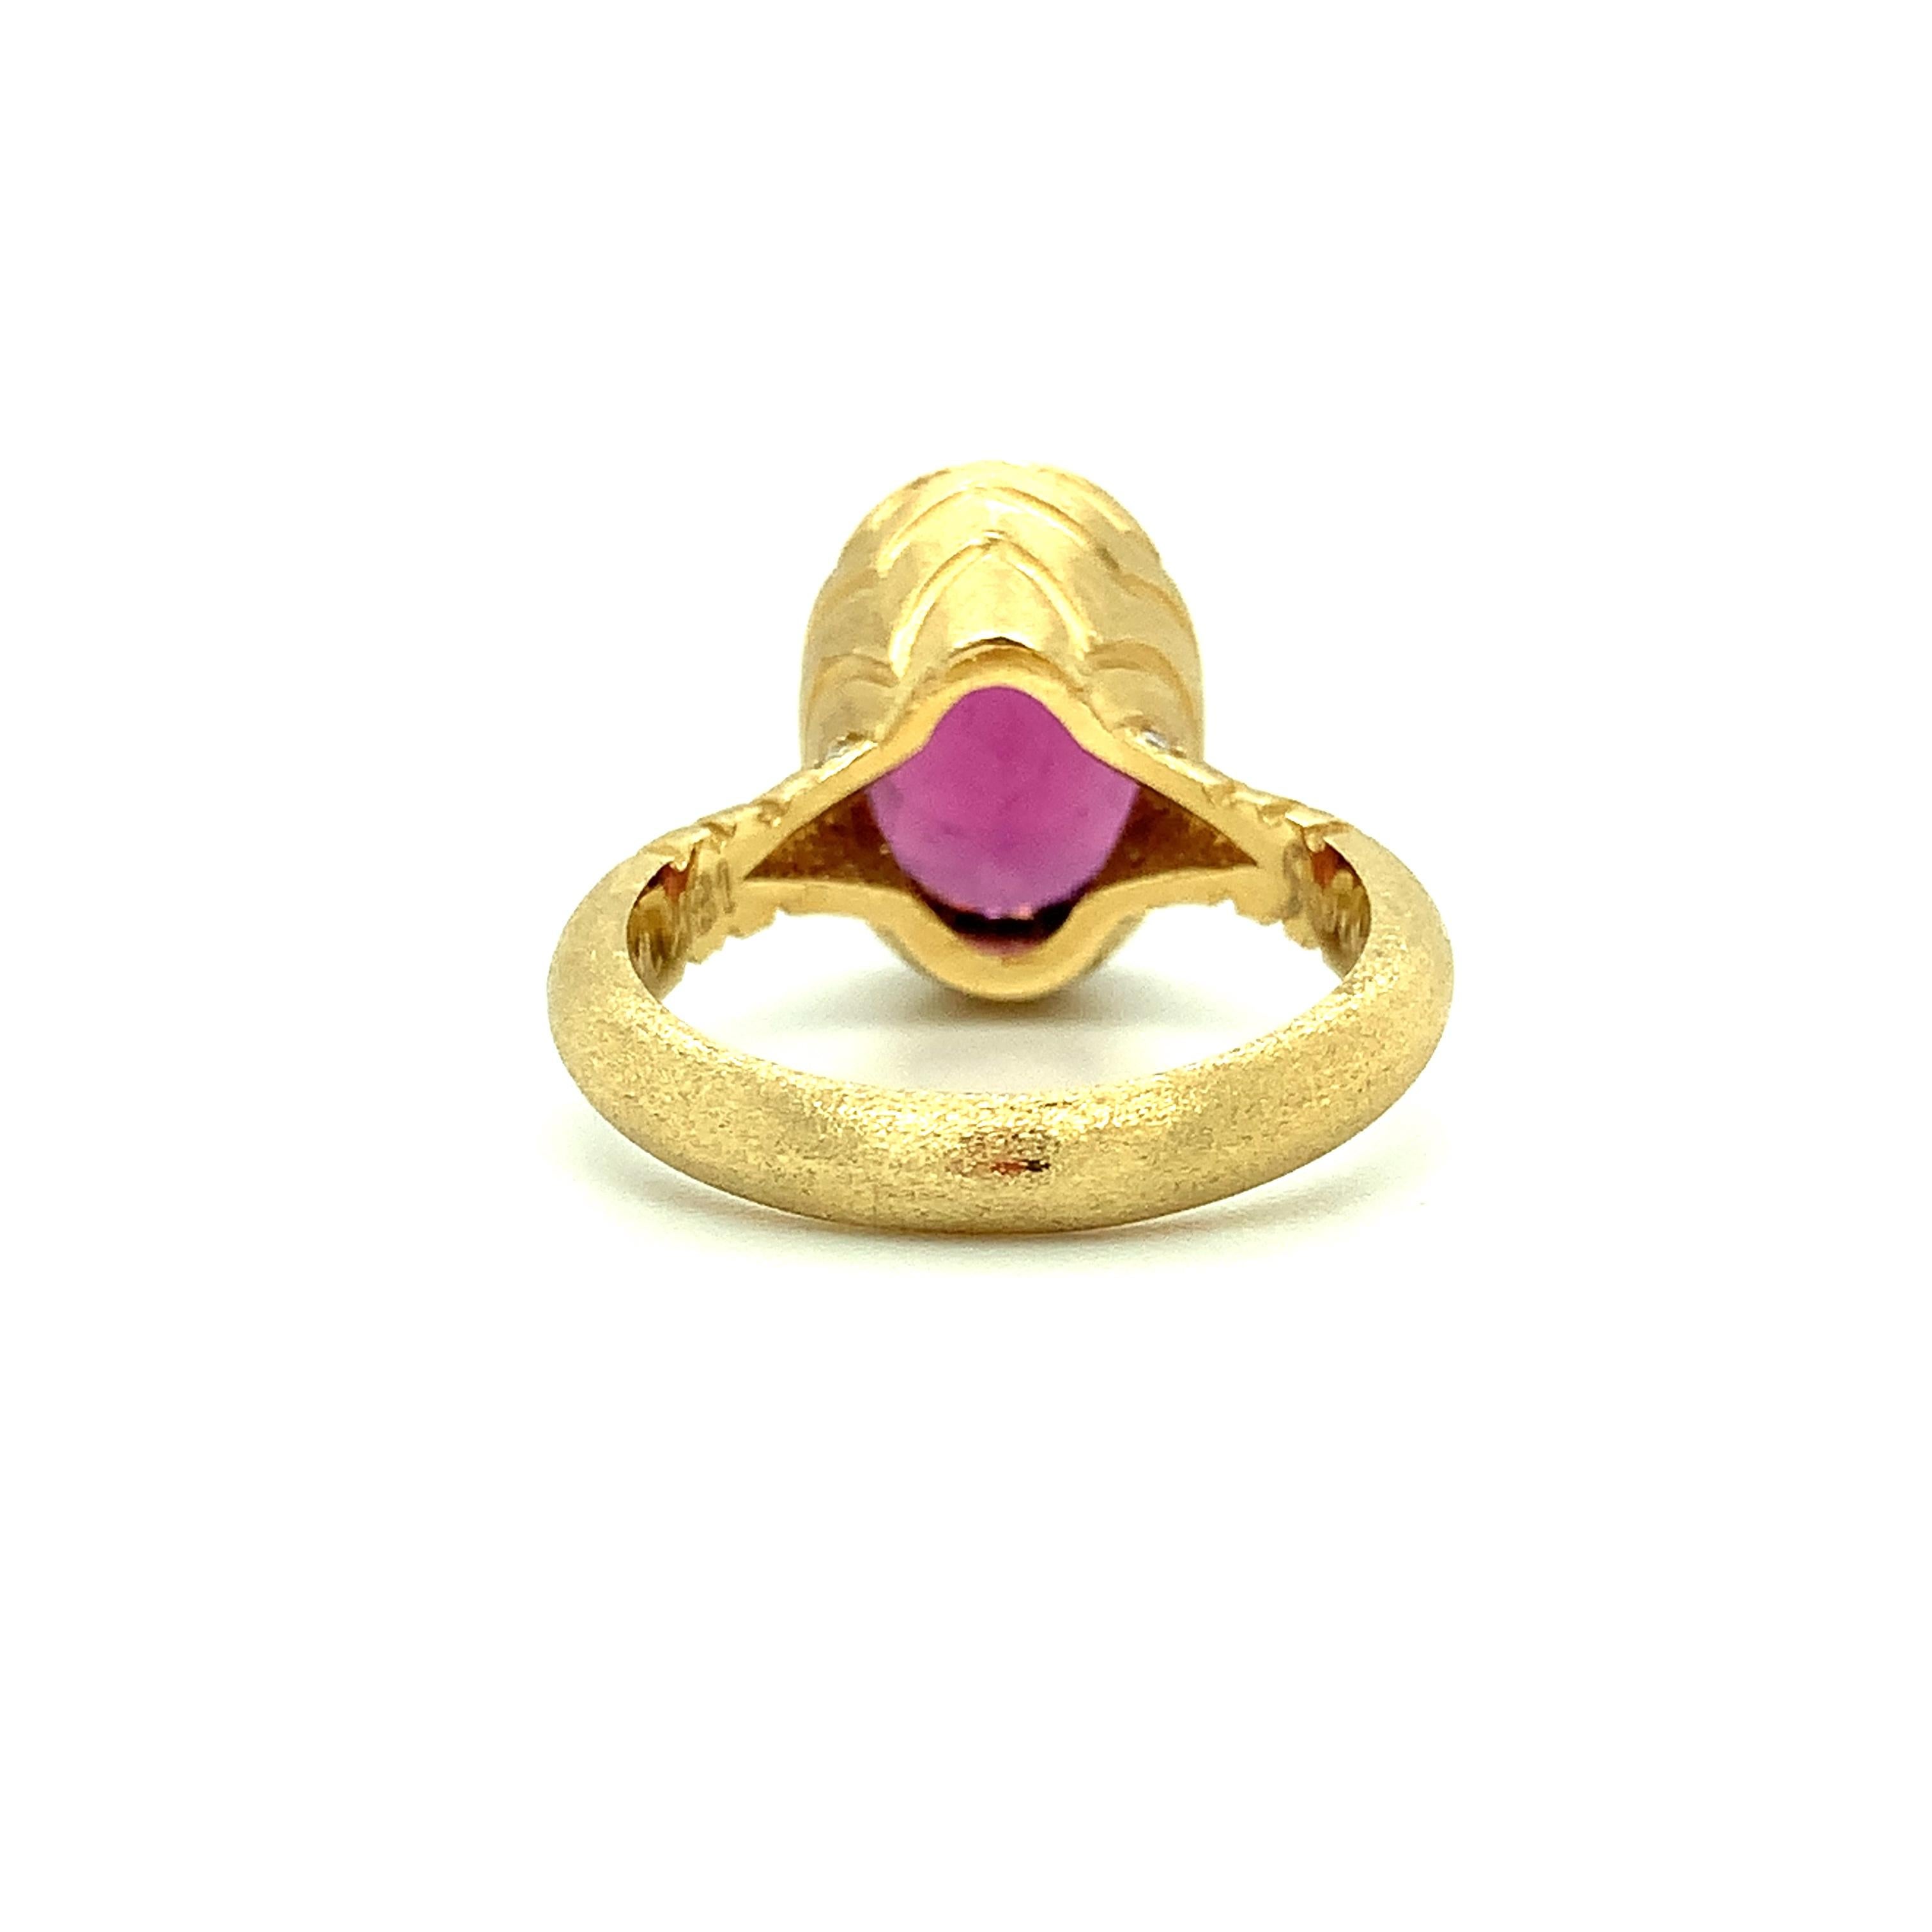 5.88 Carat Rhodolite Garnet and Diamond Ring in 18k Yellow Gold  In New Condition For Sale In Los Angeles, CA